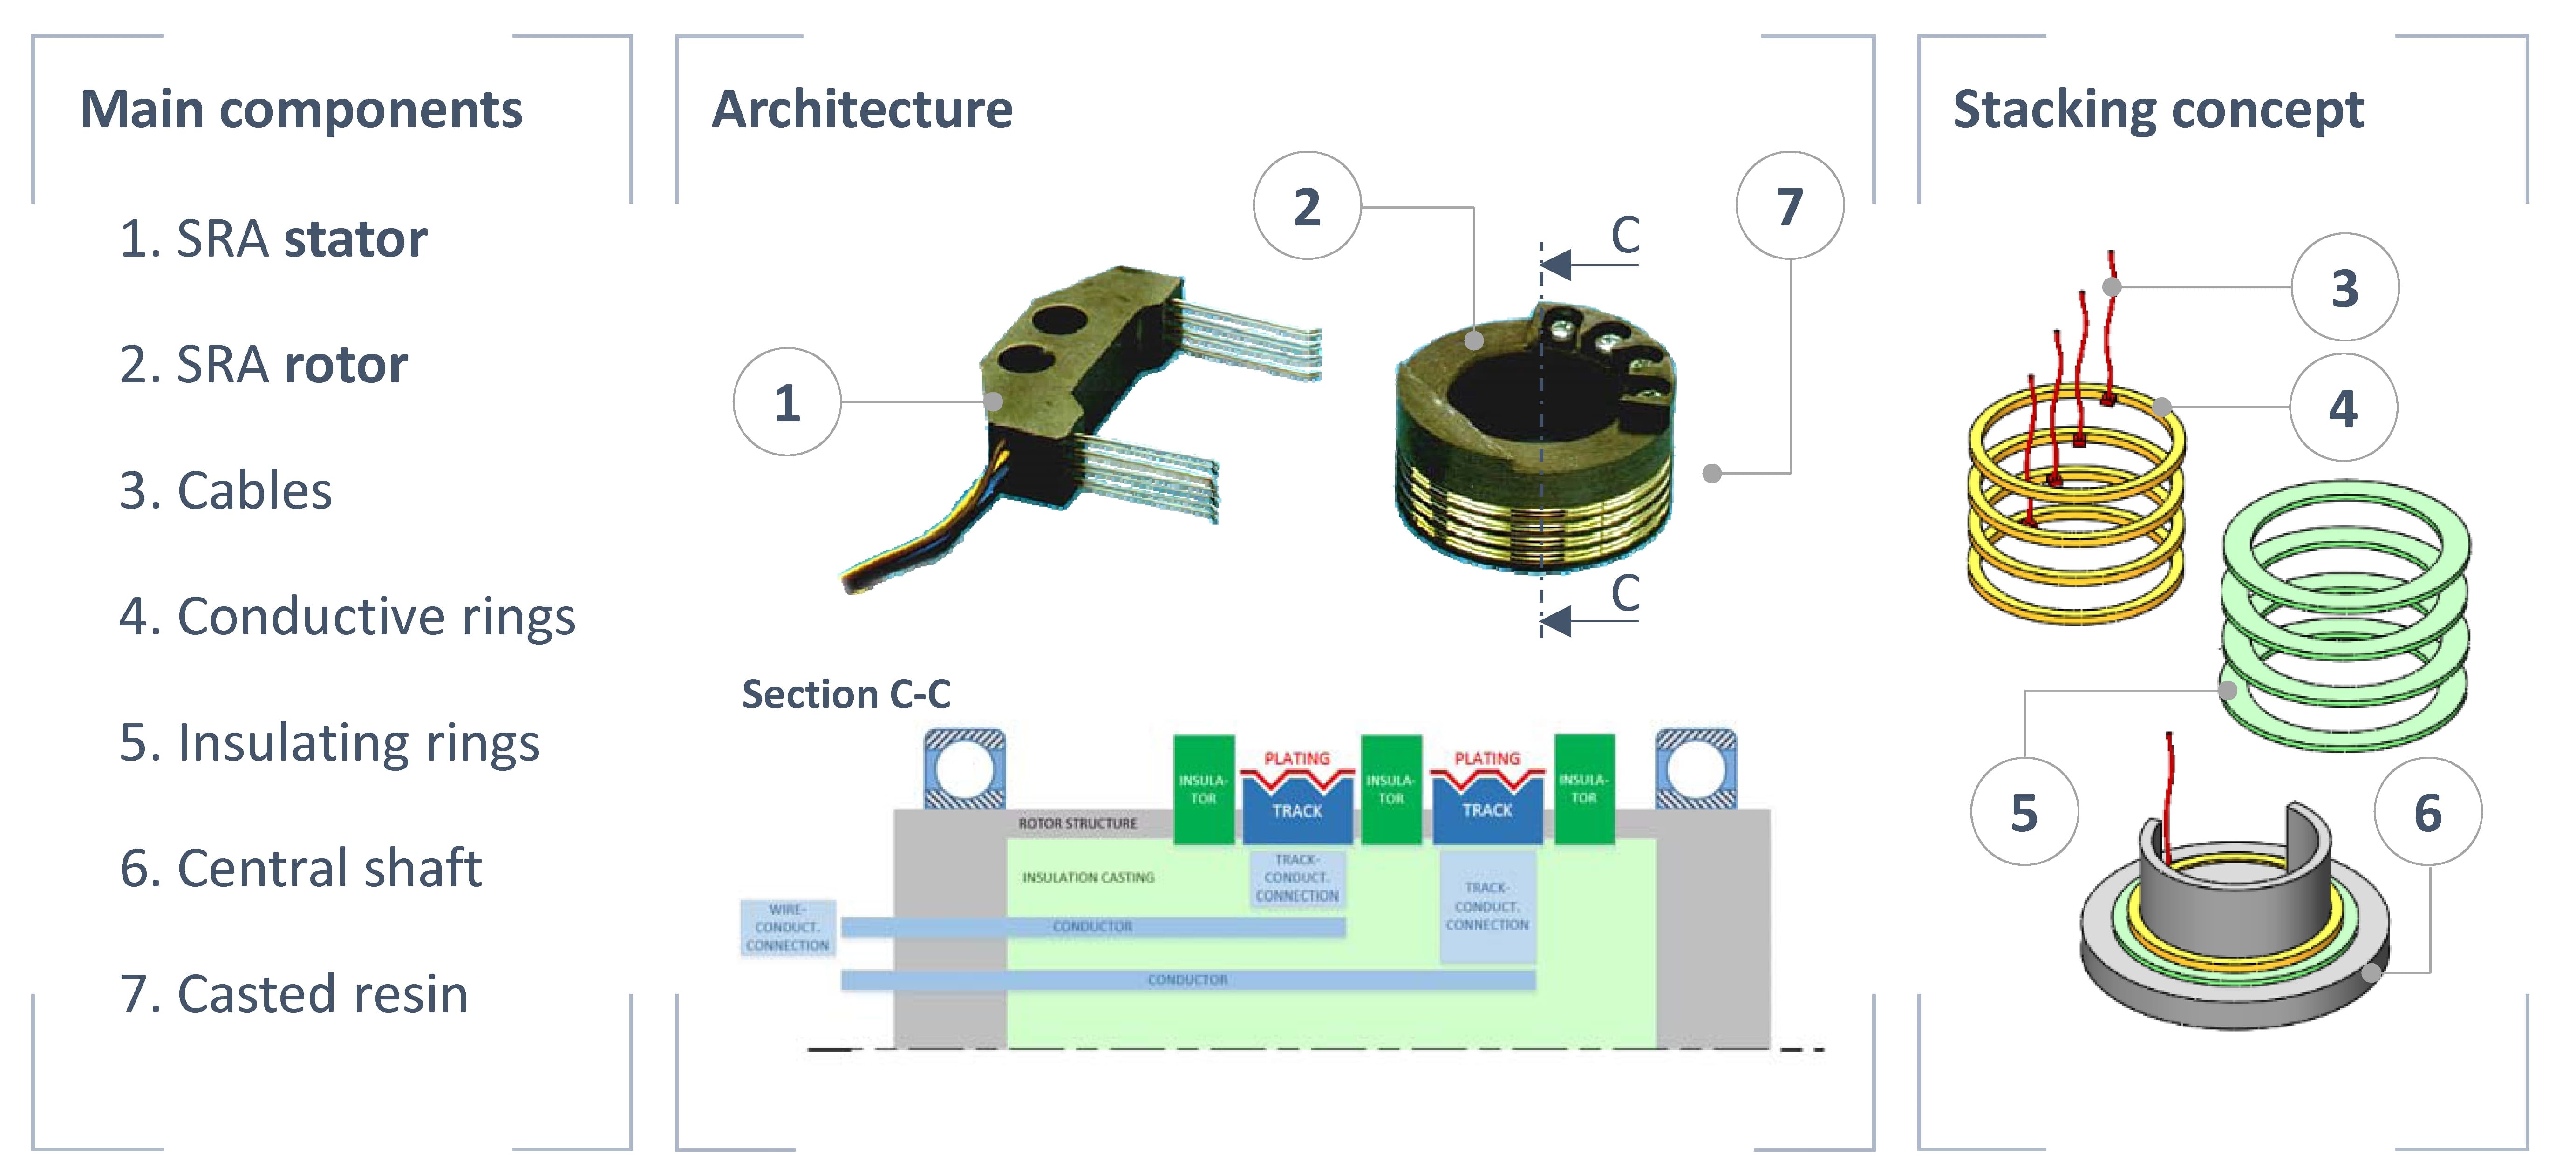 Standard architecture and assembly concept for SRA rotors